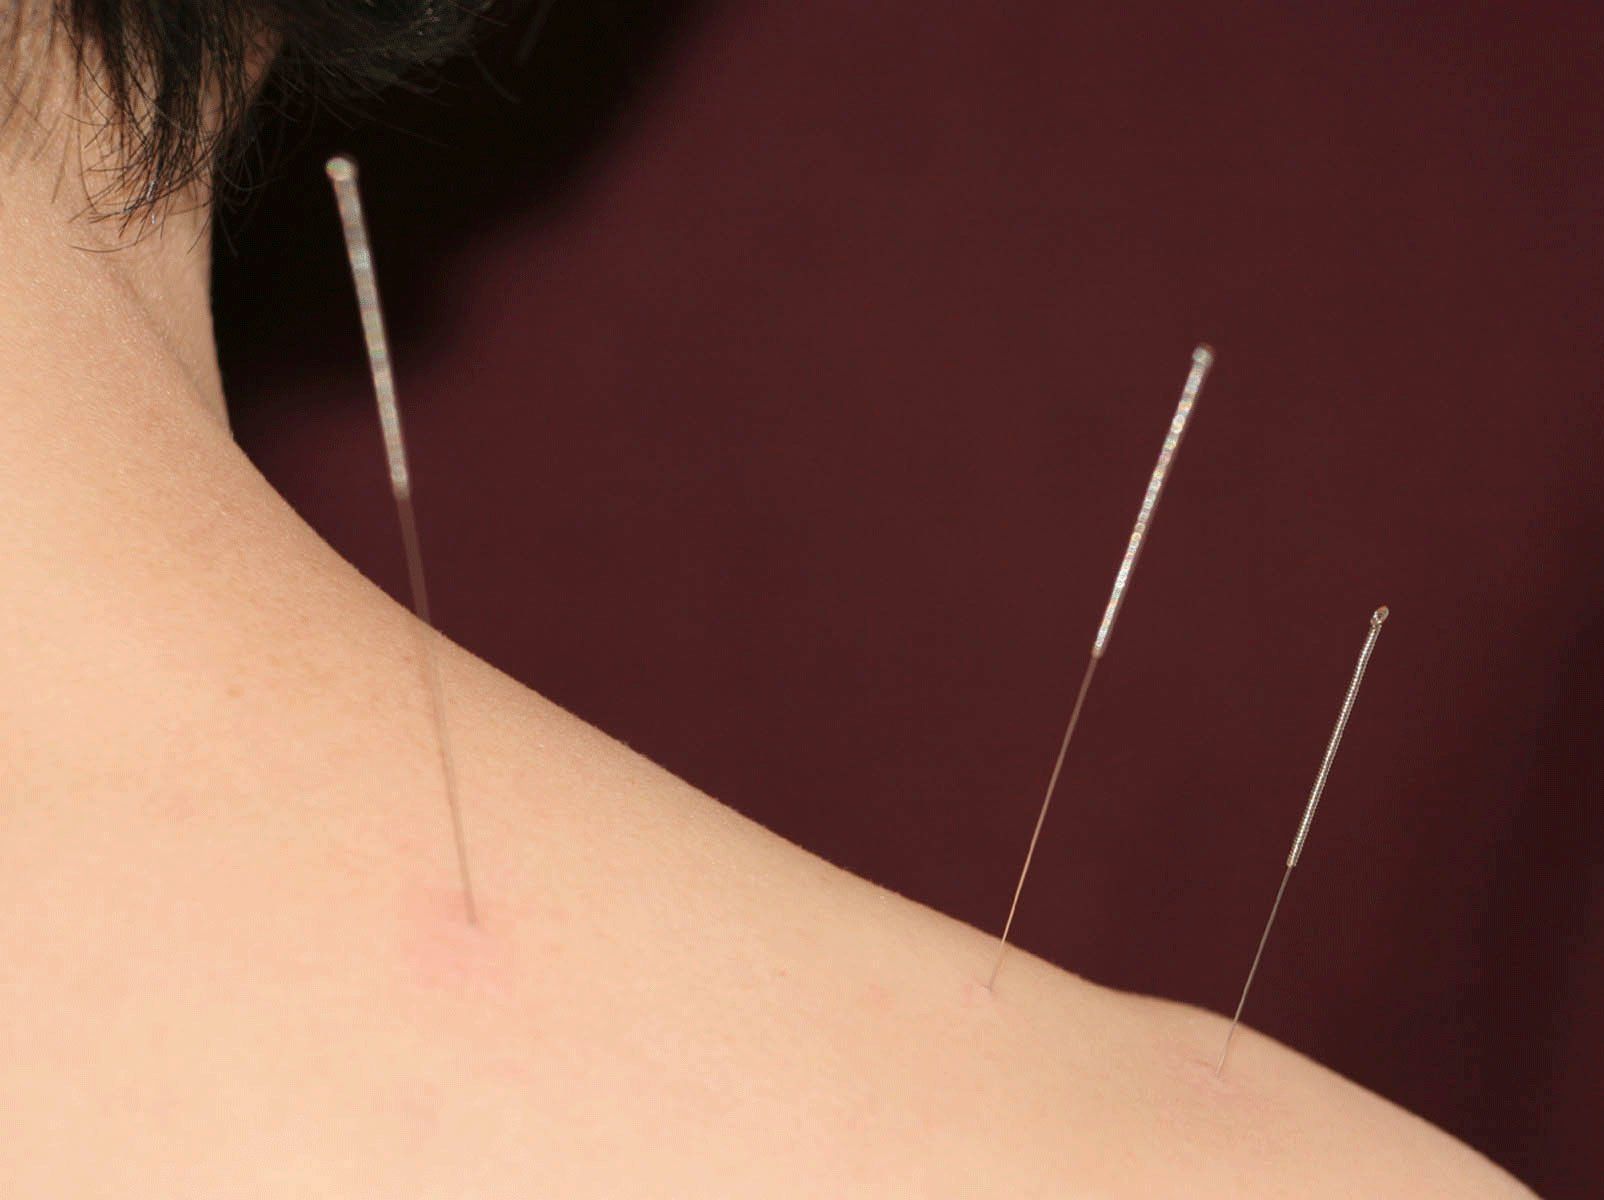 acupuncture needles in skin